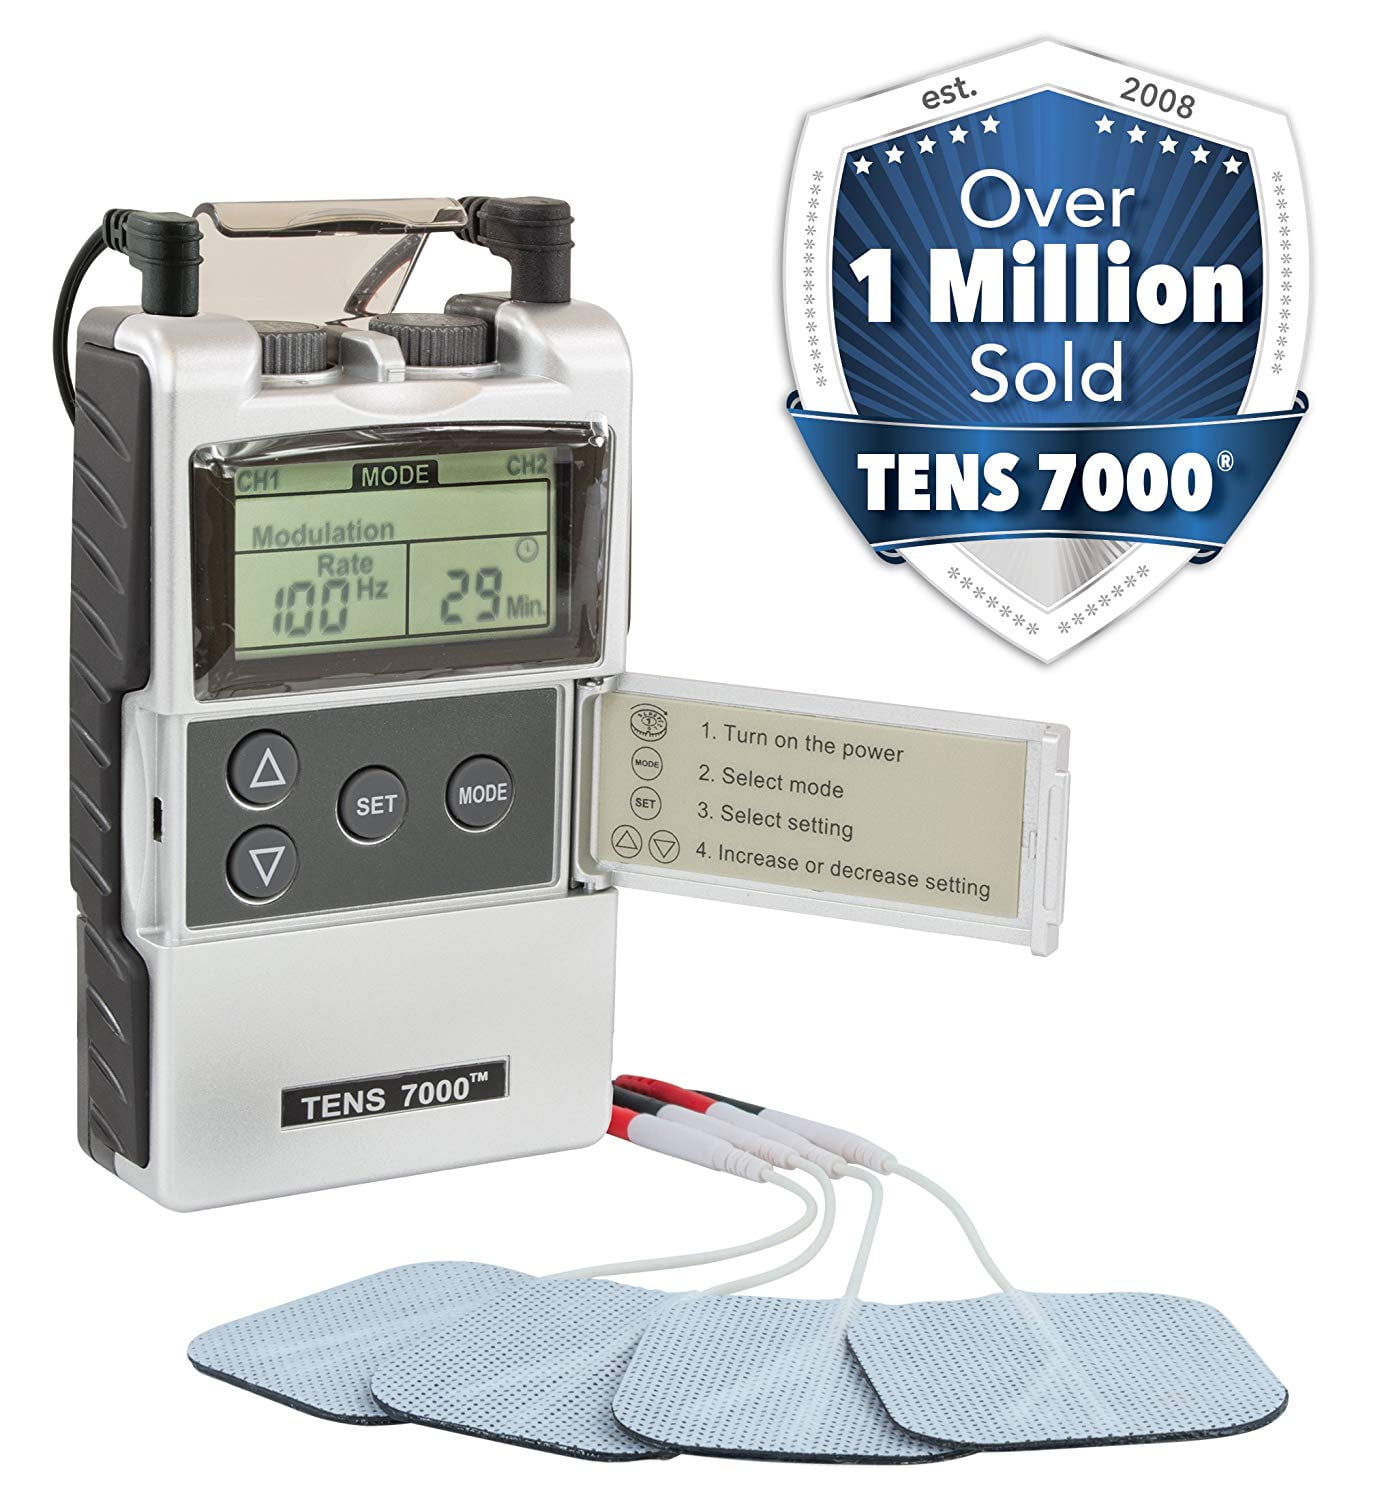 TENS 7000 Digital TENS Unit with Accessories - TENS Unit Muscle